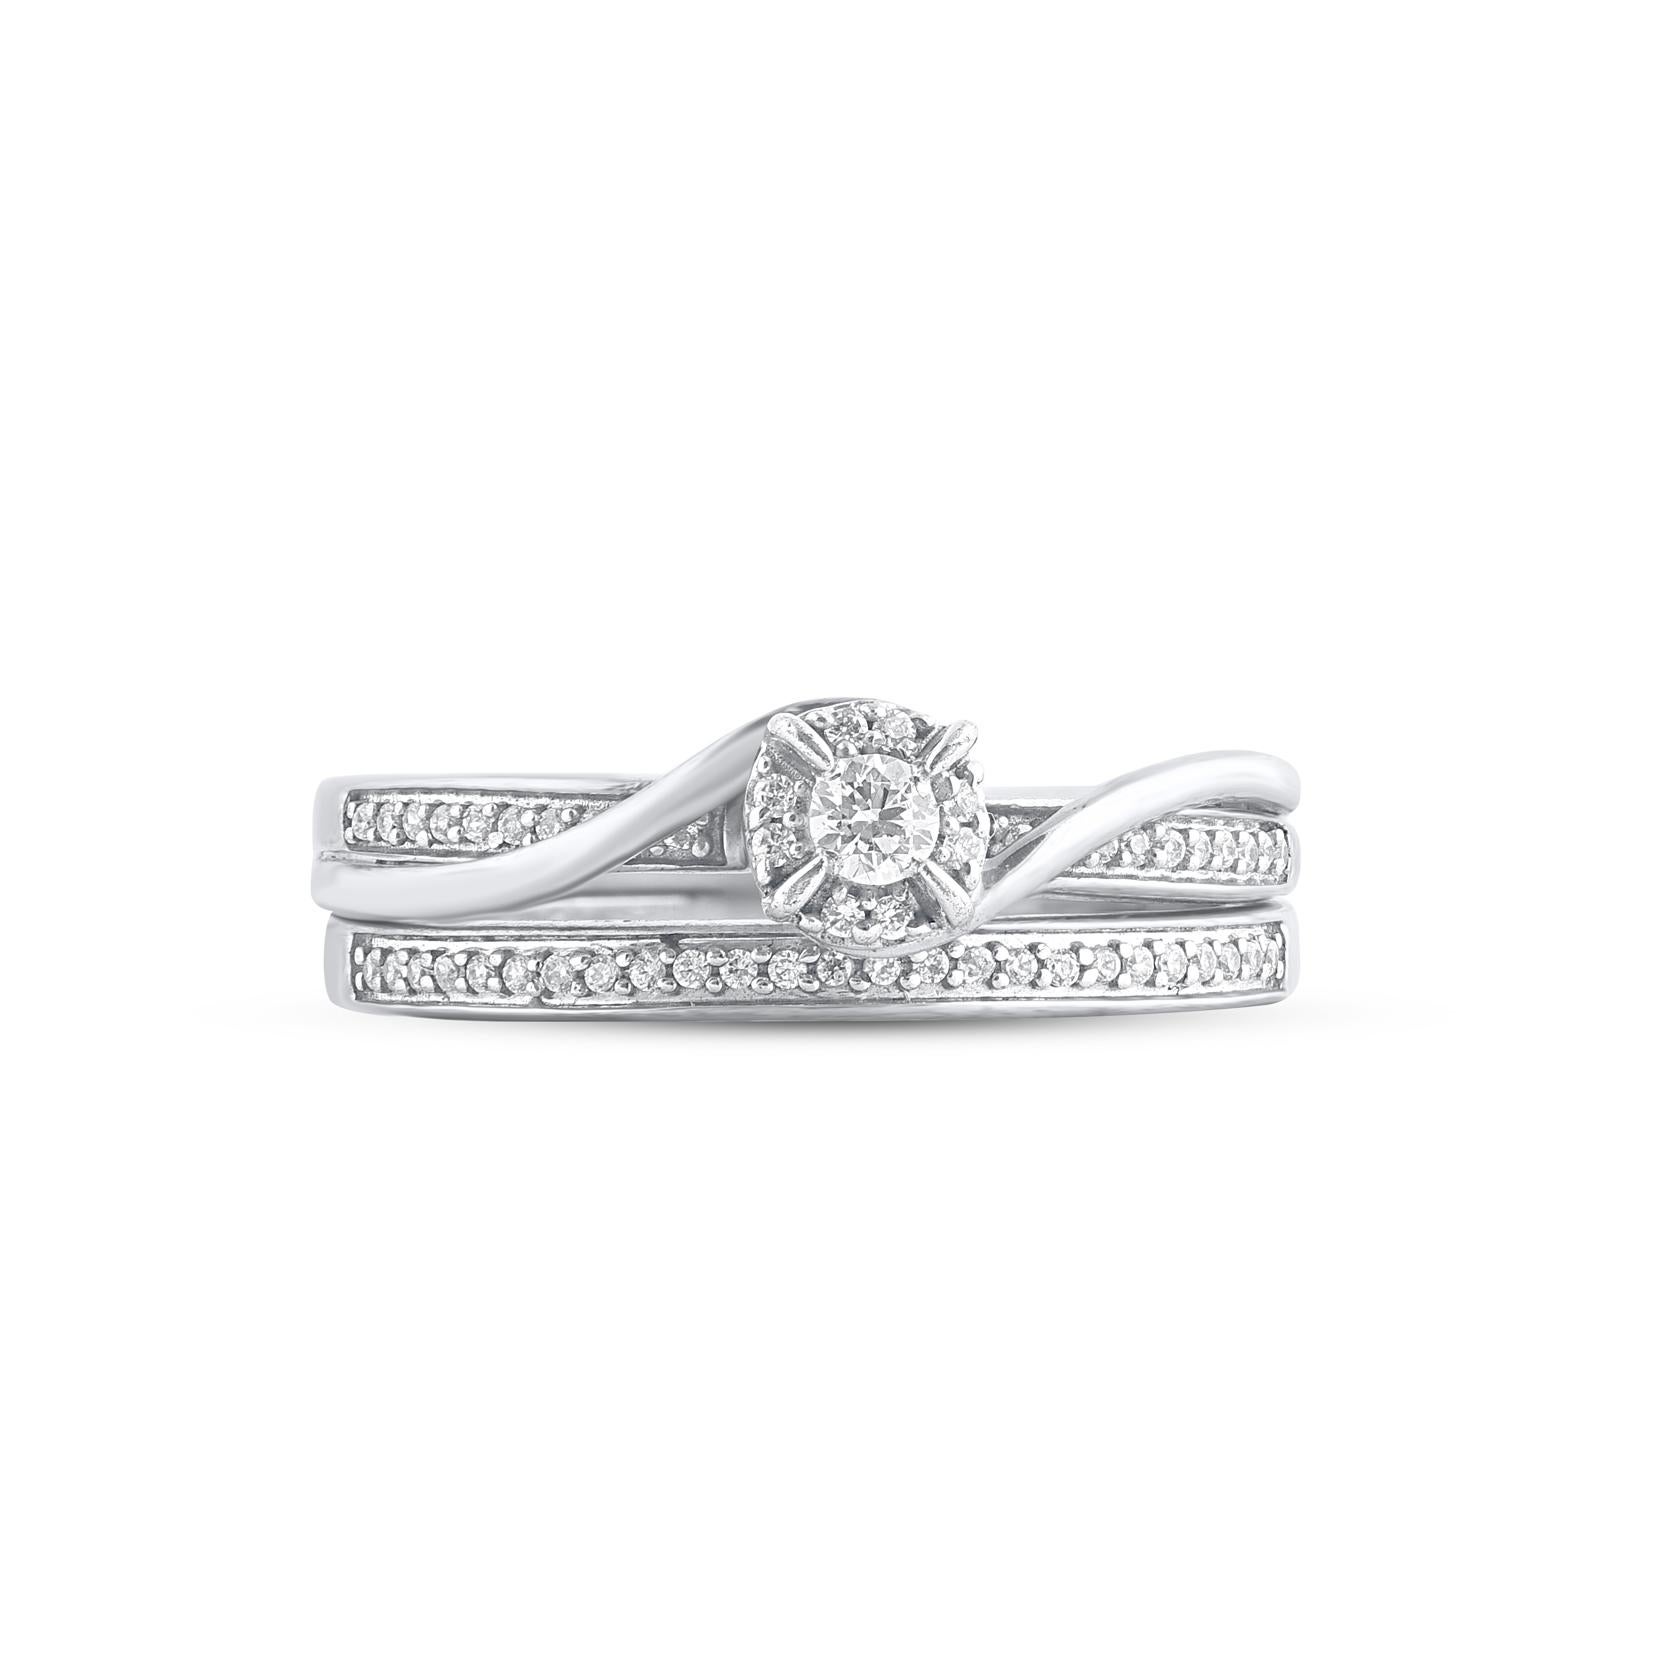 This timeless diamond bridal set will make the moment special. Crafted in 14 Karat white gold. This wedding ring features a sparkling 54 brilliant cut and single cut round diamonds beautifully set in prong and pave setting. The total diamond weight